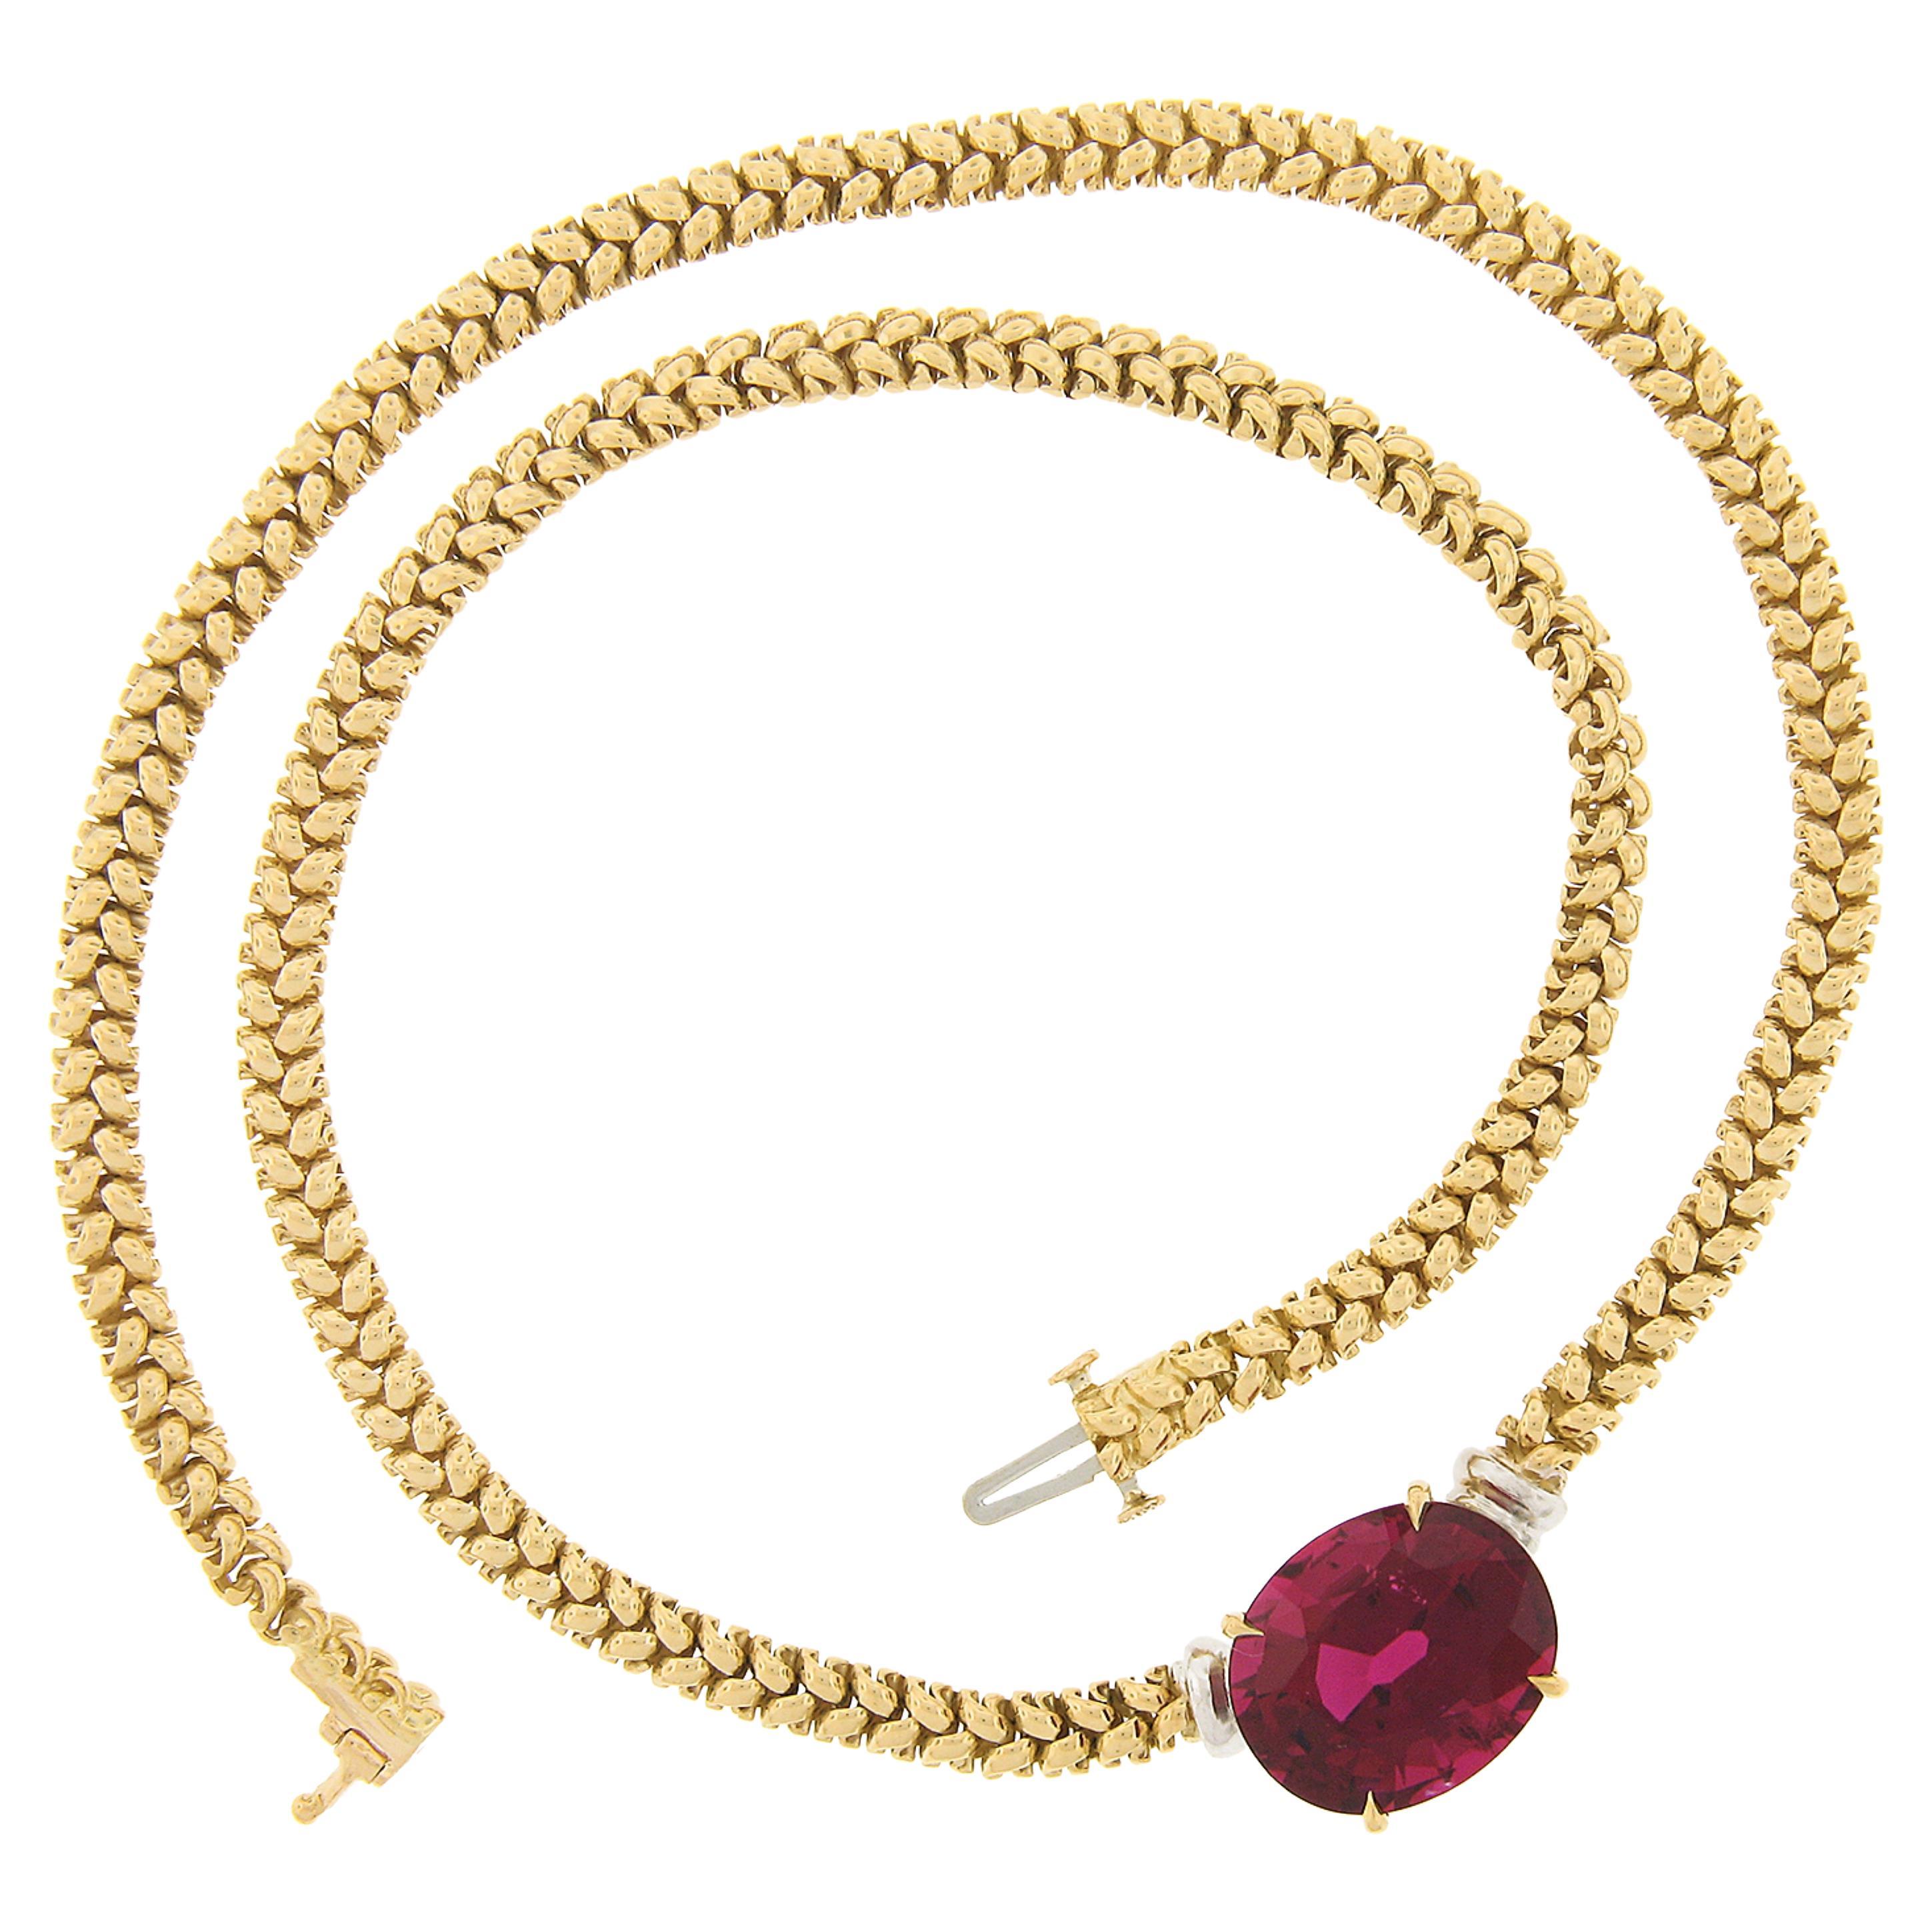 18k Two Tone Gold 12.82 Carat GIA Large Oval Red Rubellite Tourmaline Necklace For Sale